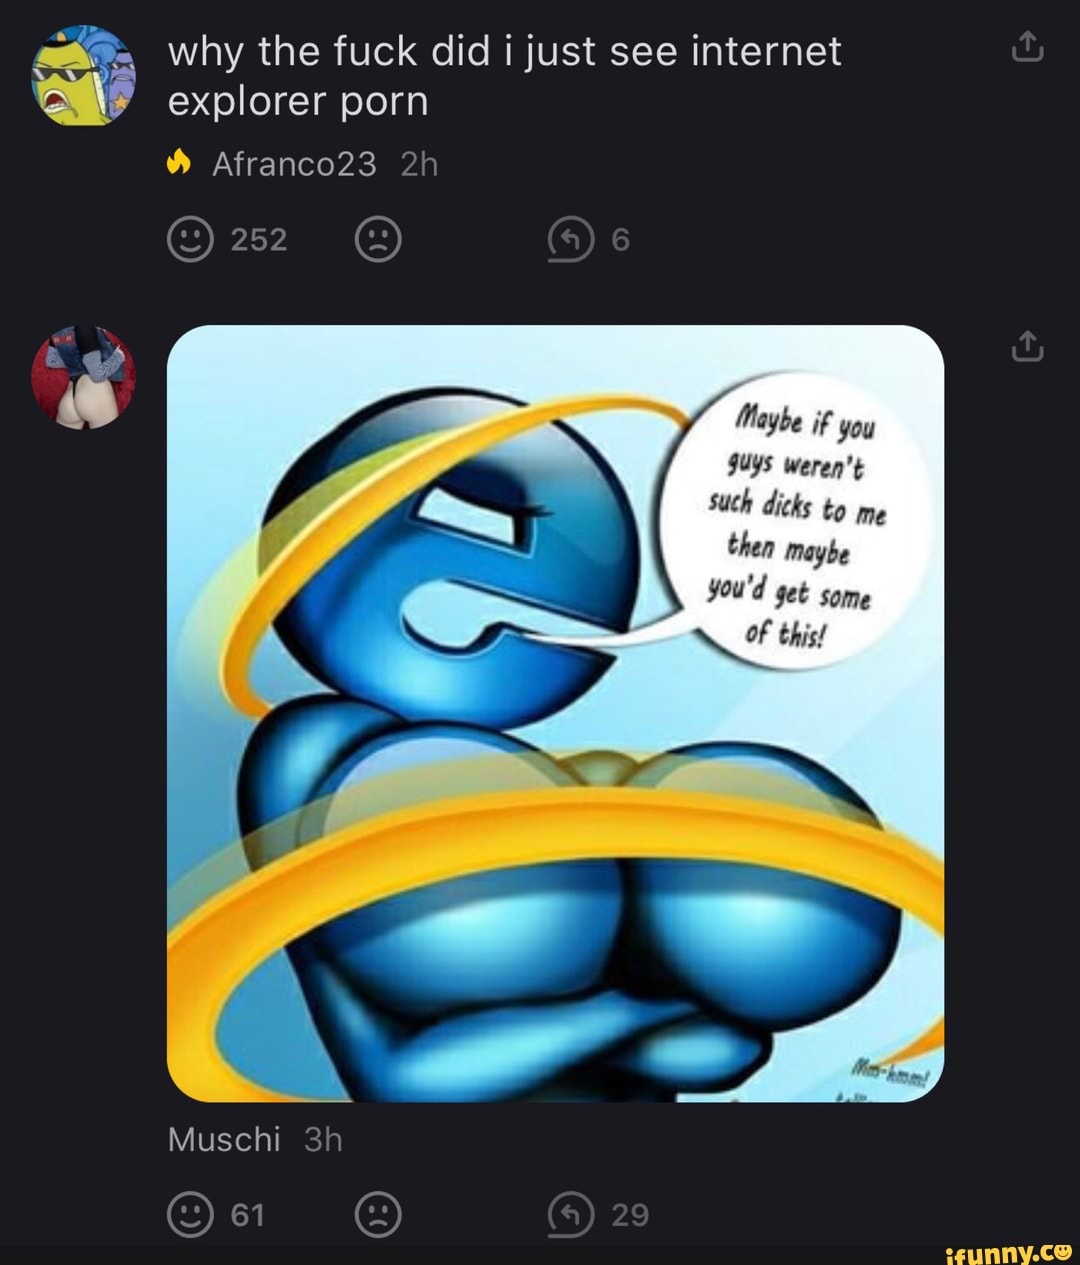 1080px x 1265px - We. why the fuck did i just see internet Sh explorer porn - iFunny